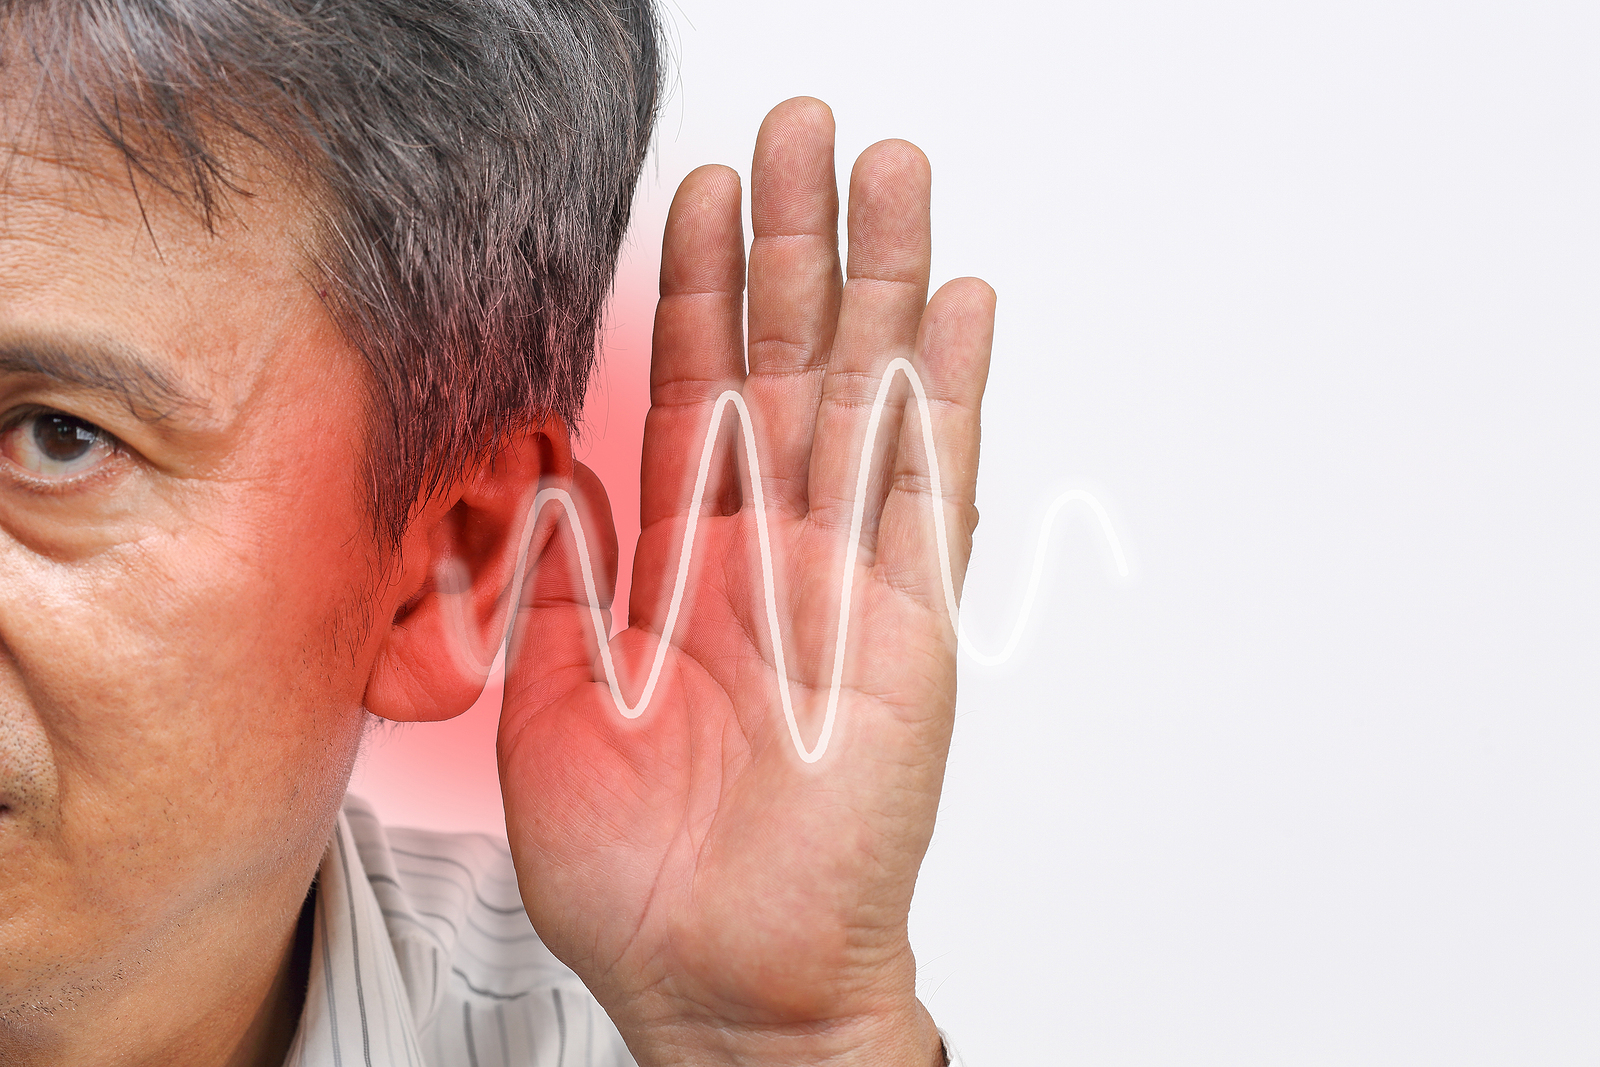 What Things Can Cause Sudden Hearing Loss To Occur?